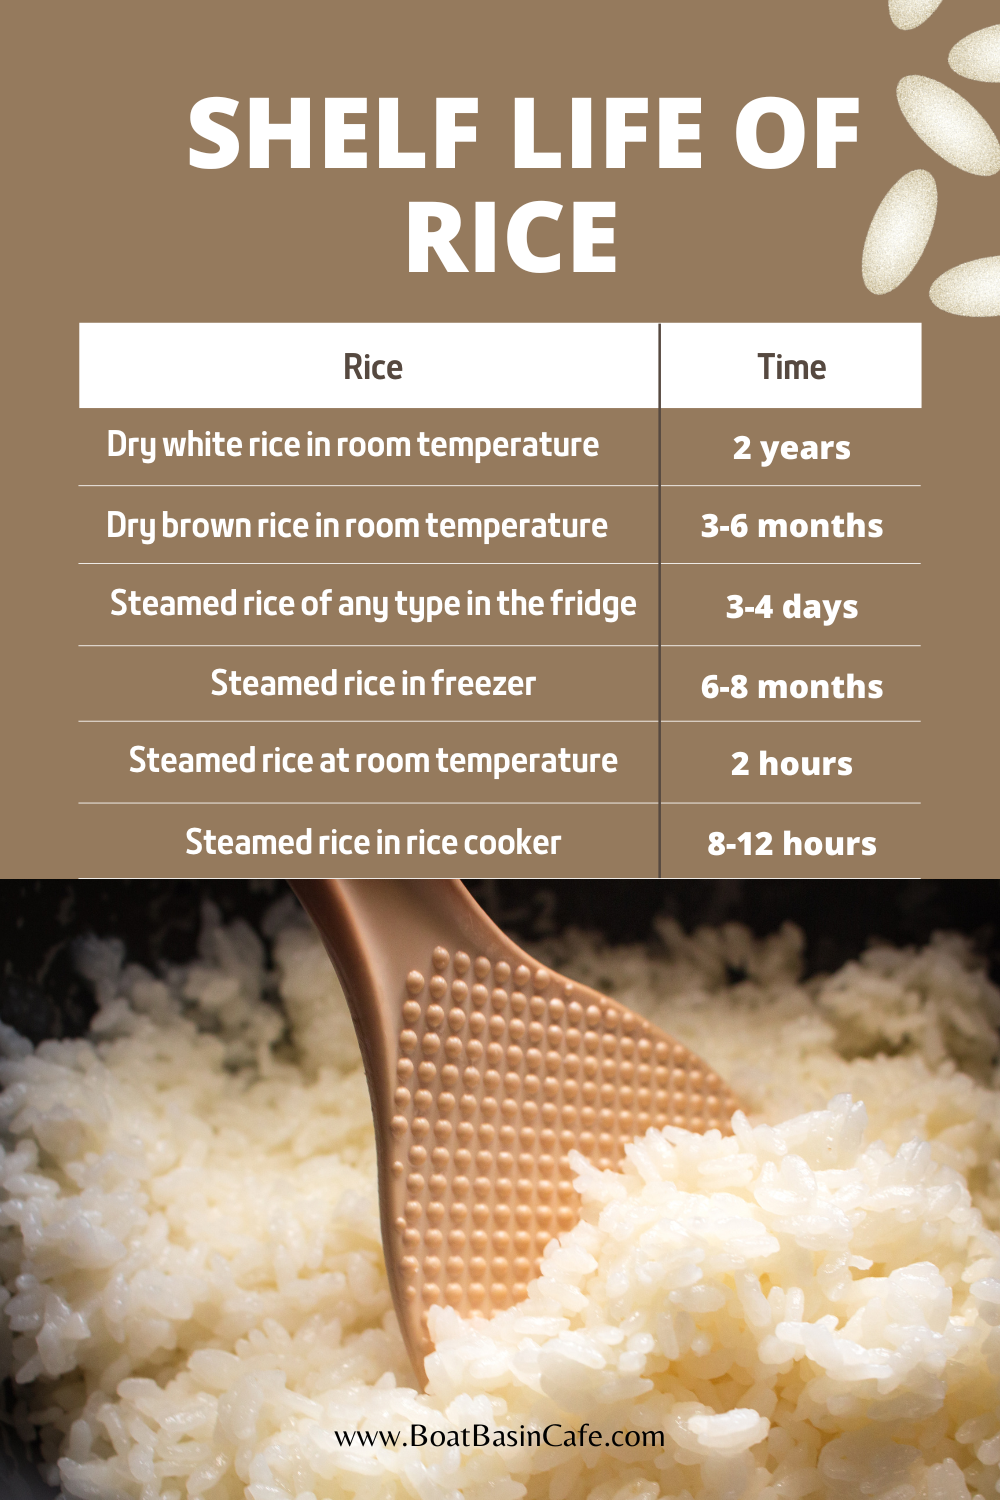 How Long Will Cooked Rice Last In The Fridge?